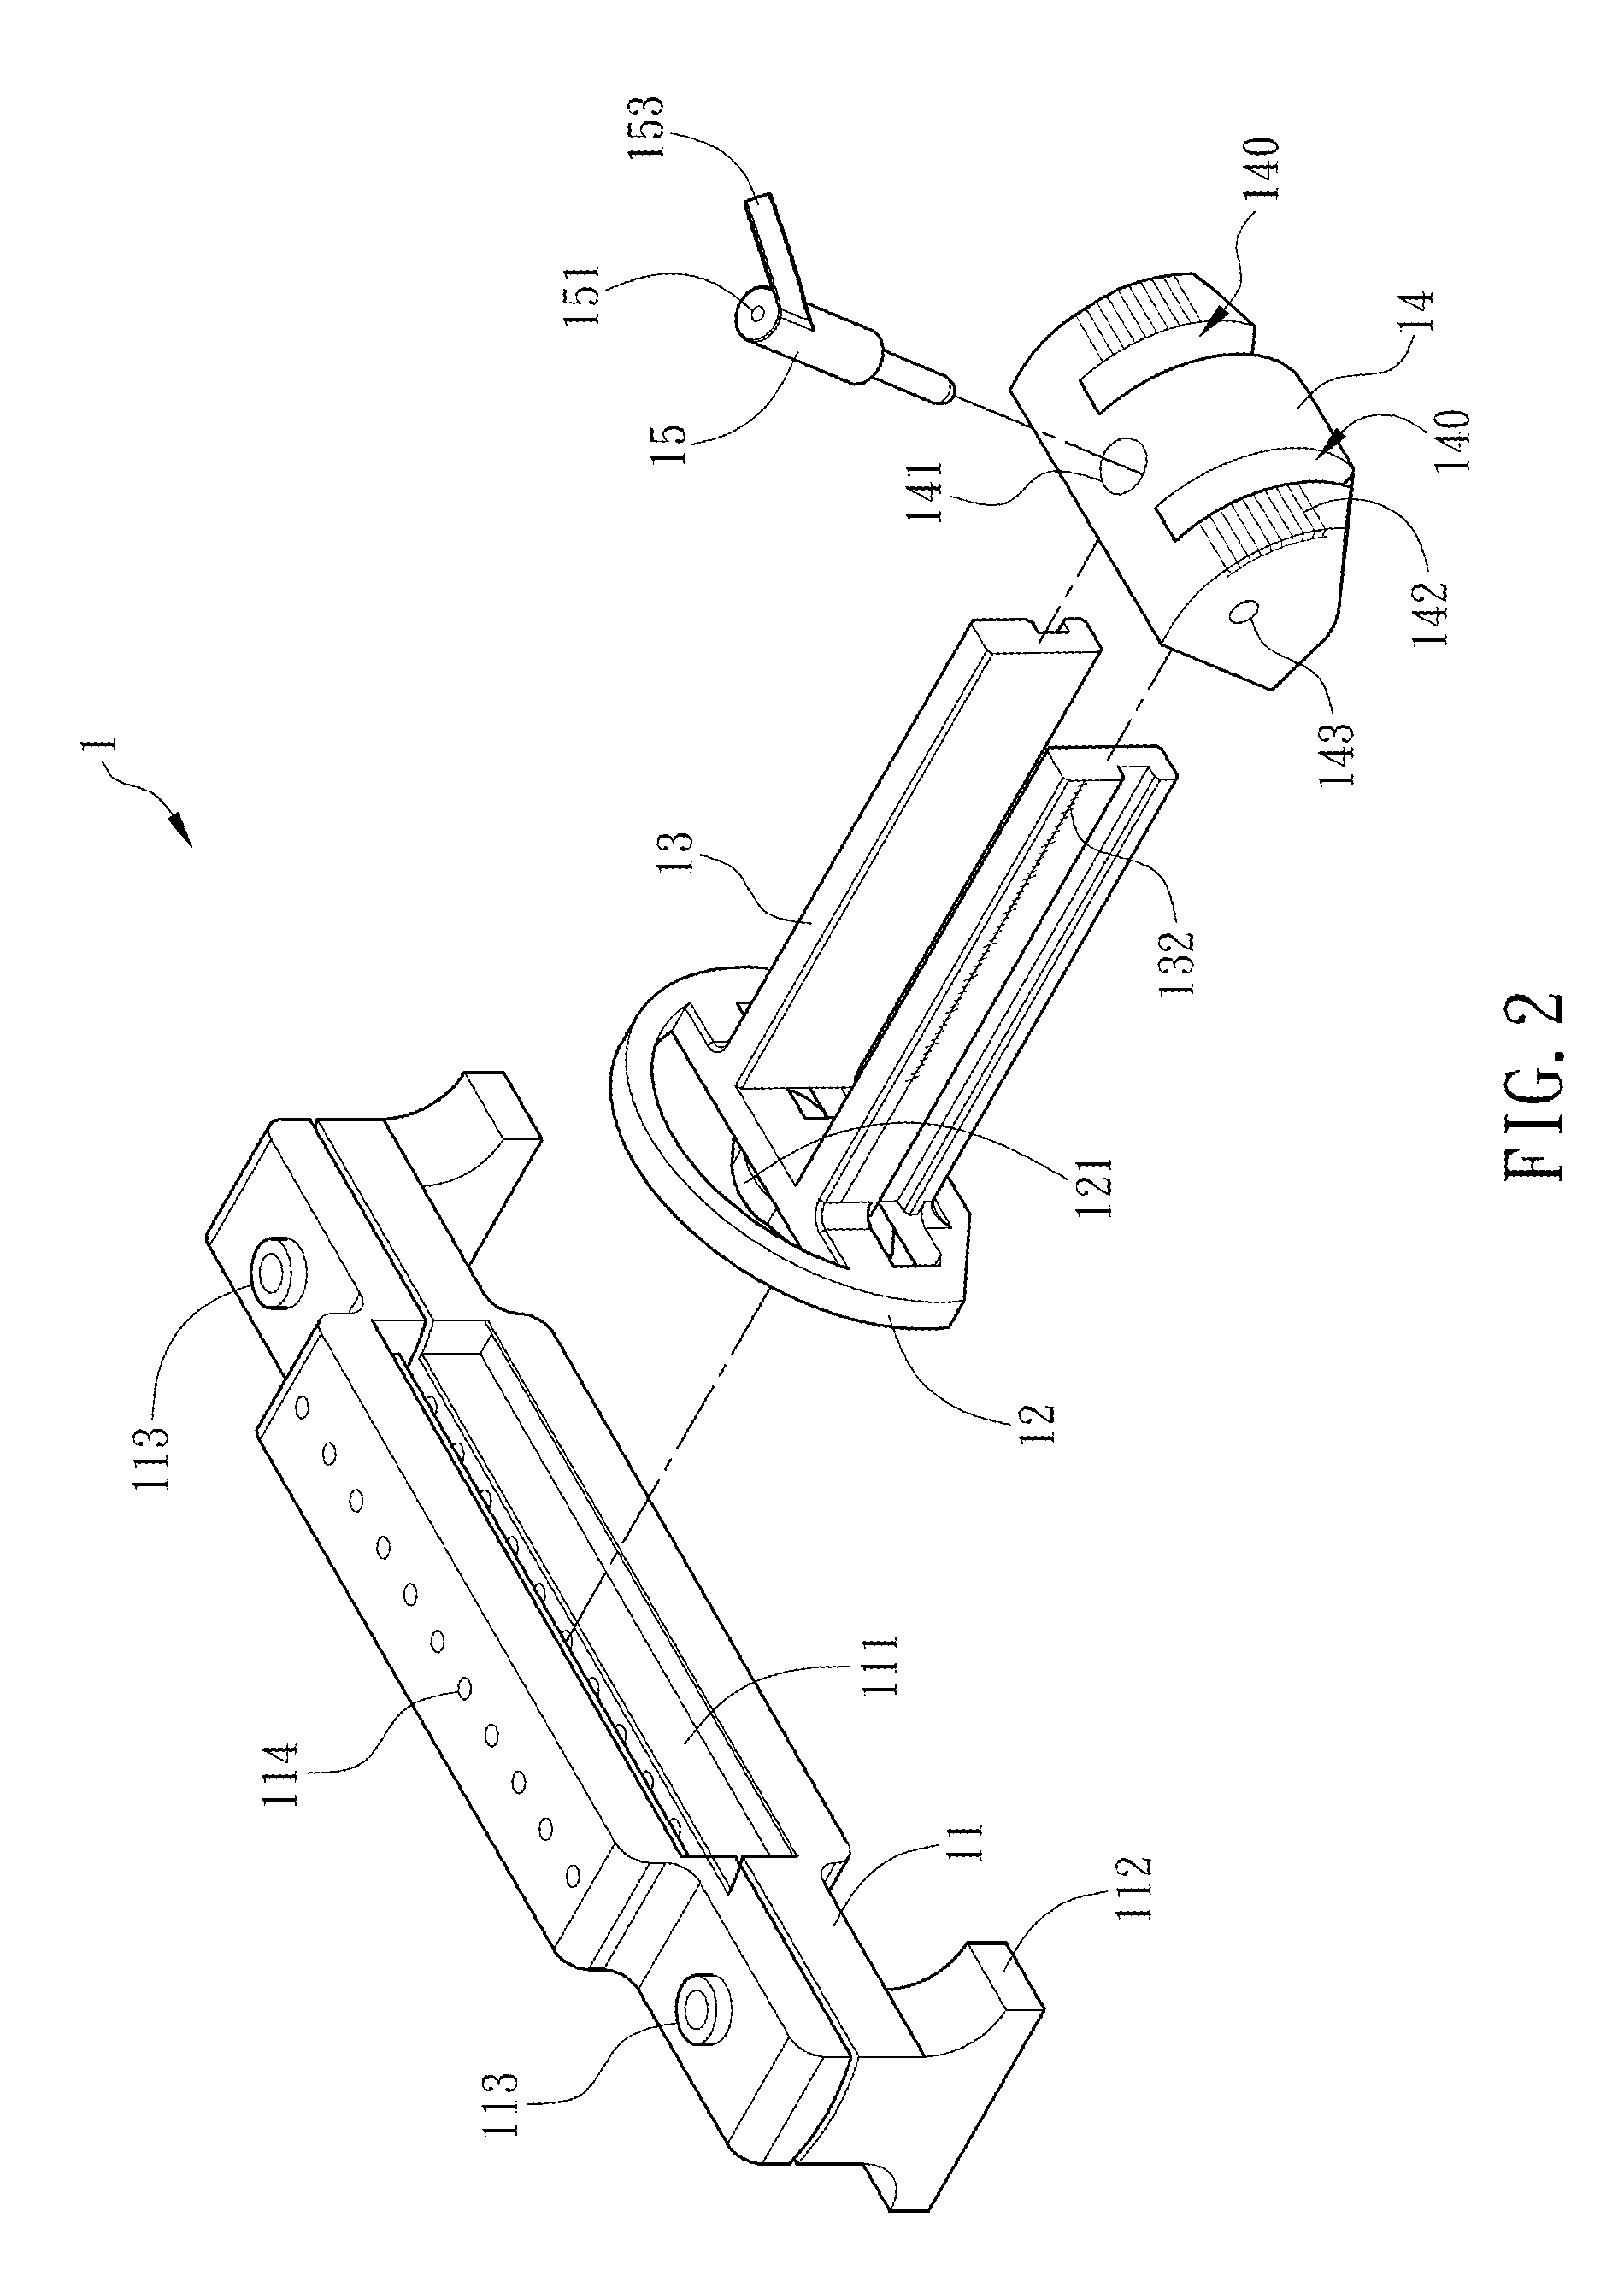 Assistant device and guiding assembly for percutaneous surgery